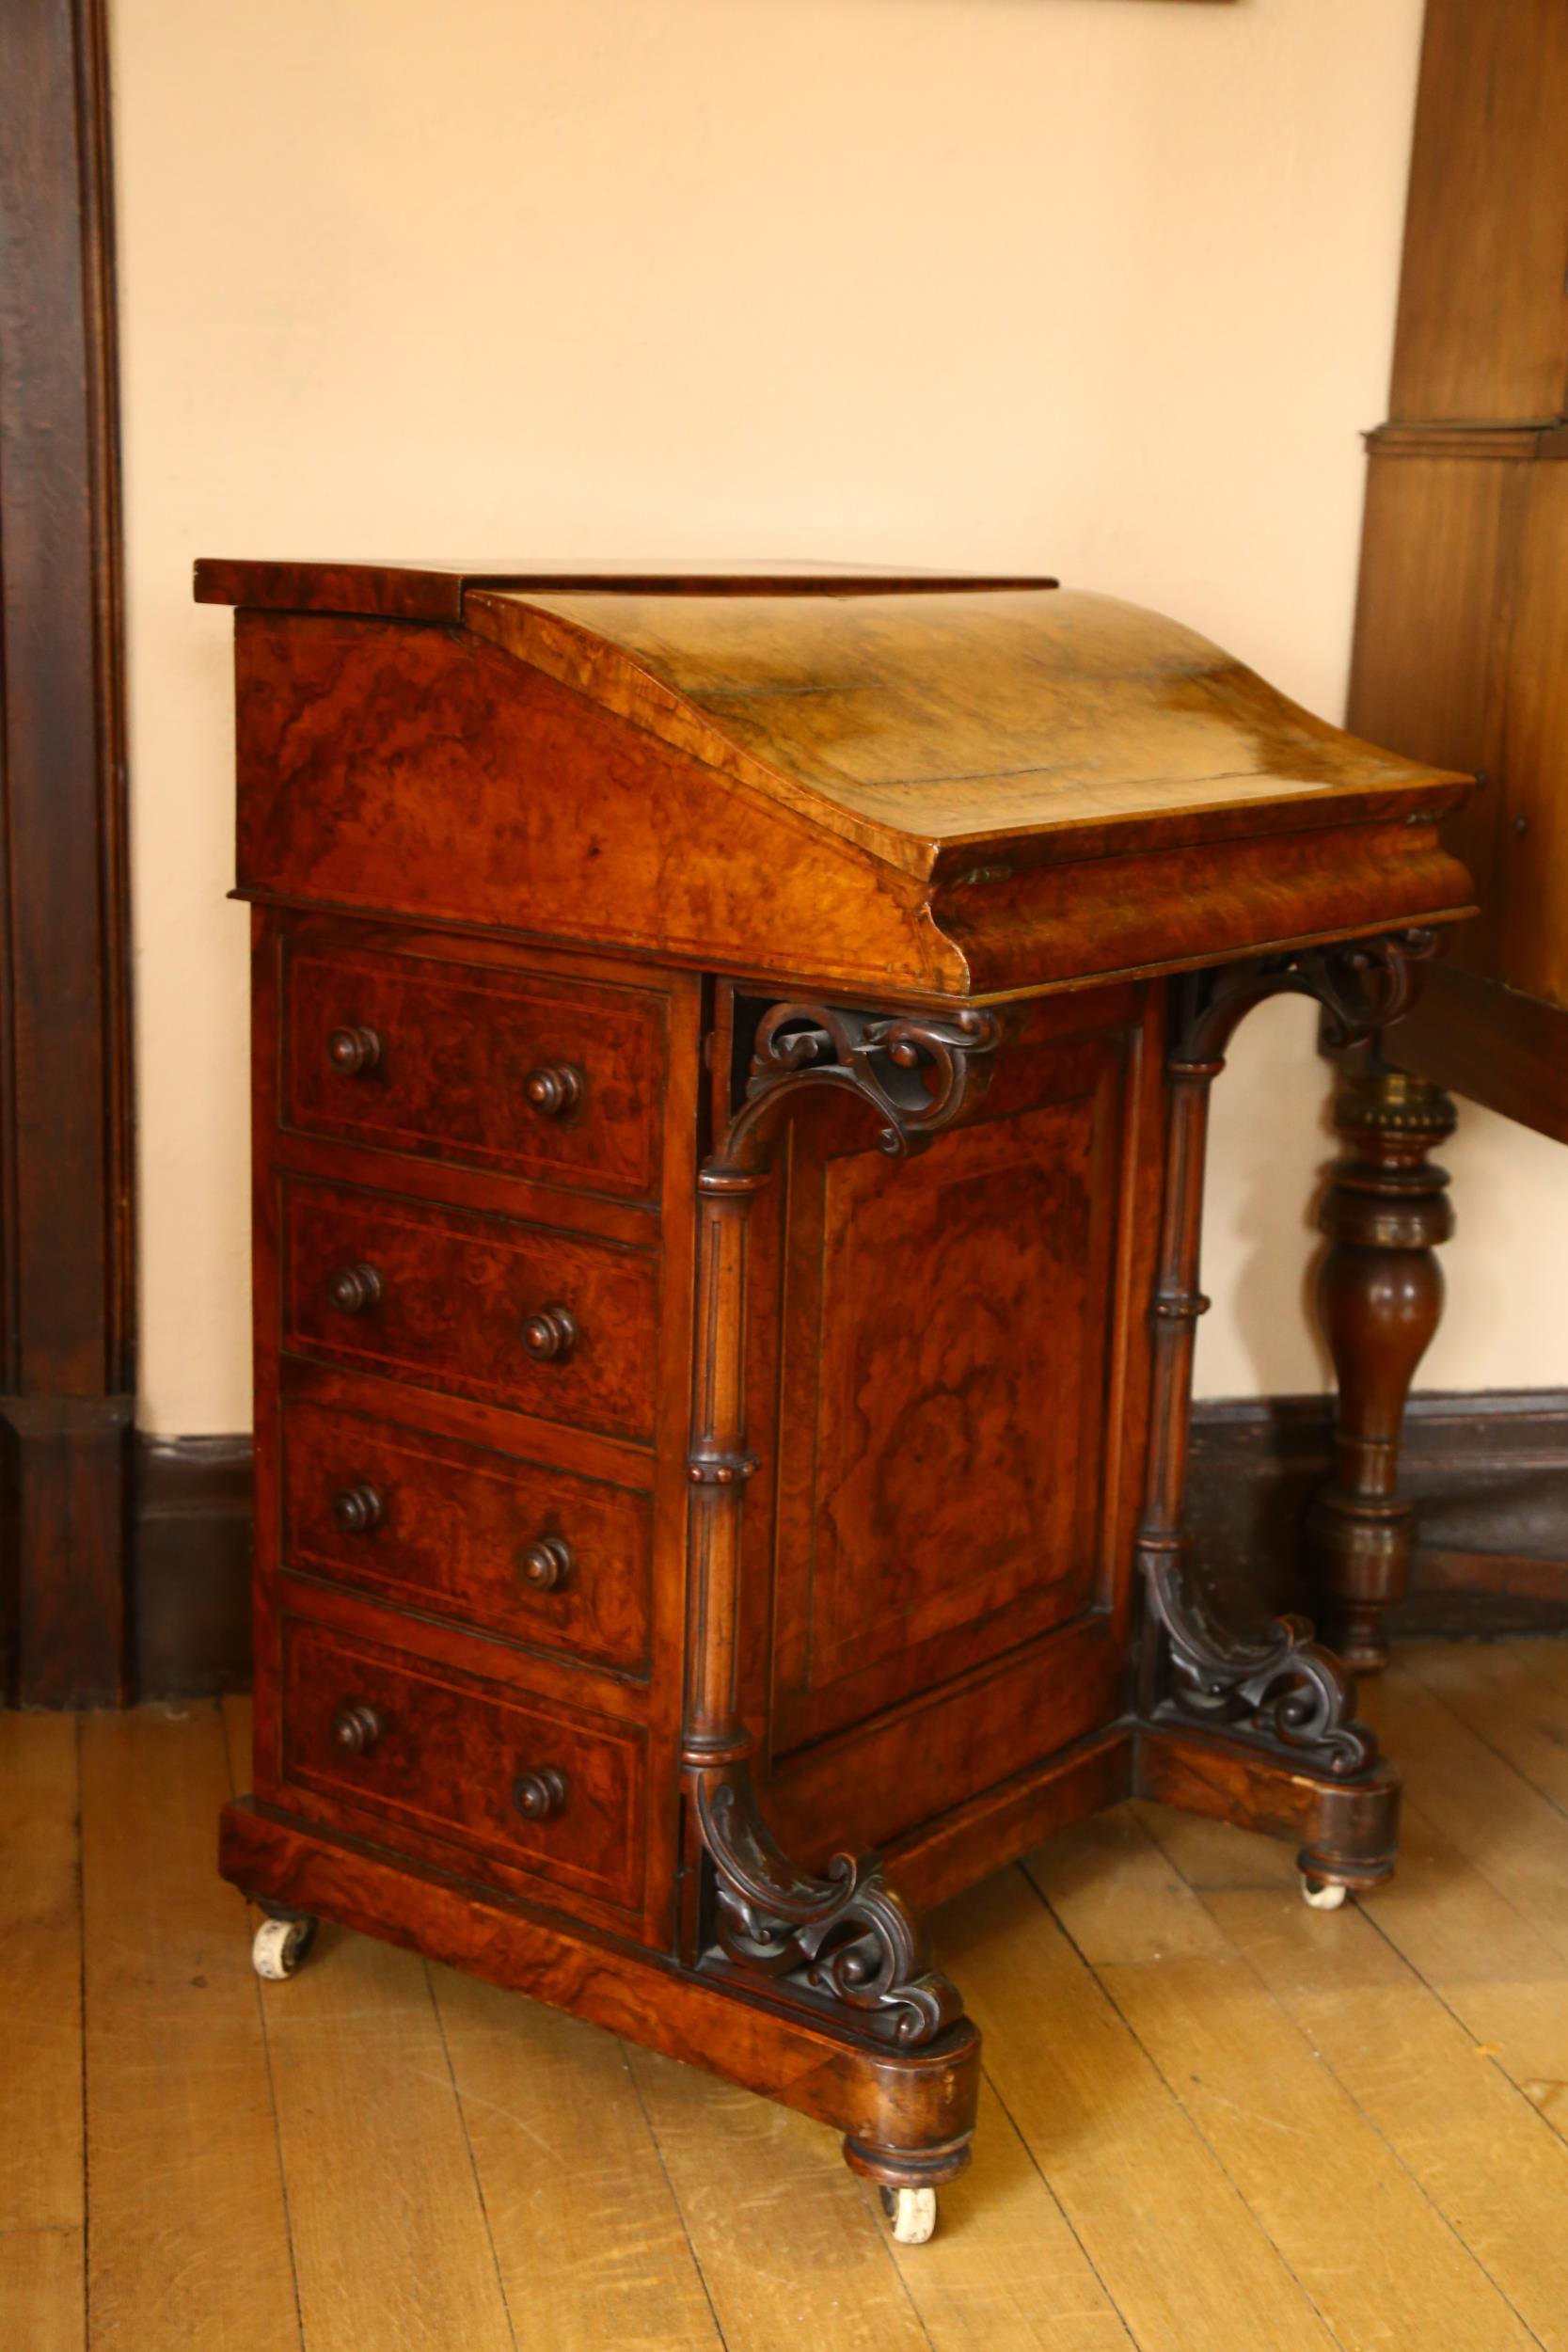 A Victorian burr-walnut Davenport, with slope front, hinged stationery rack backing, 4 side